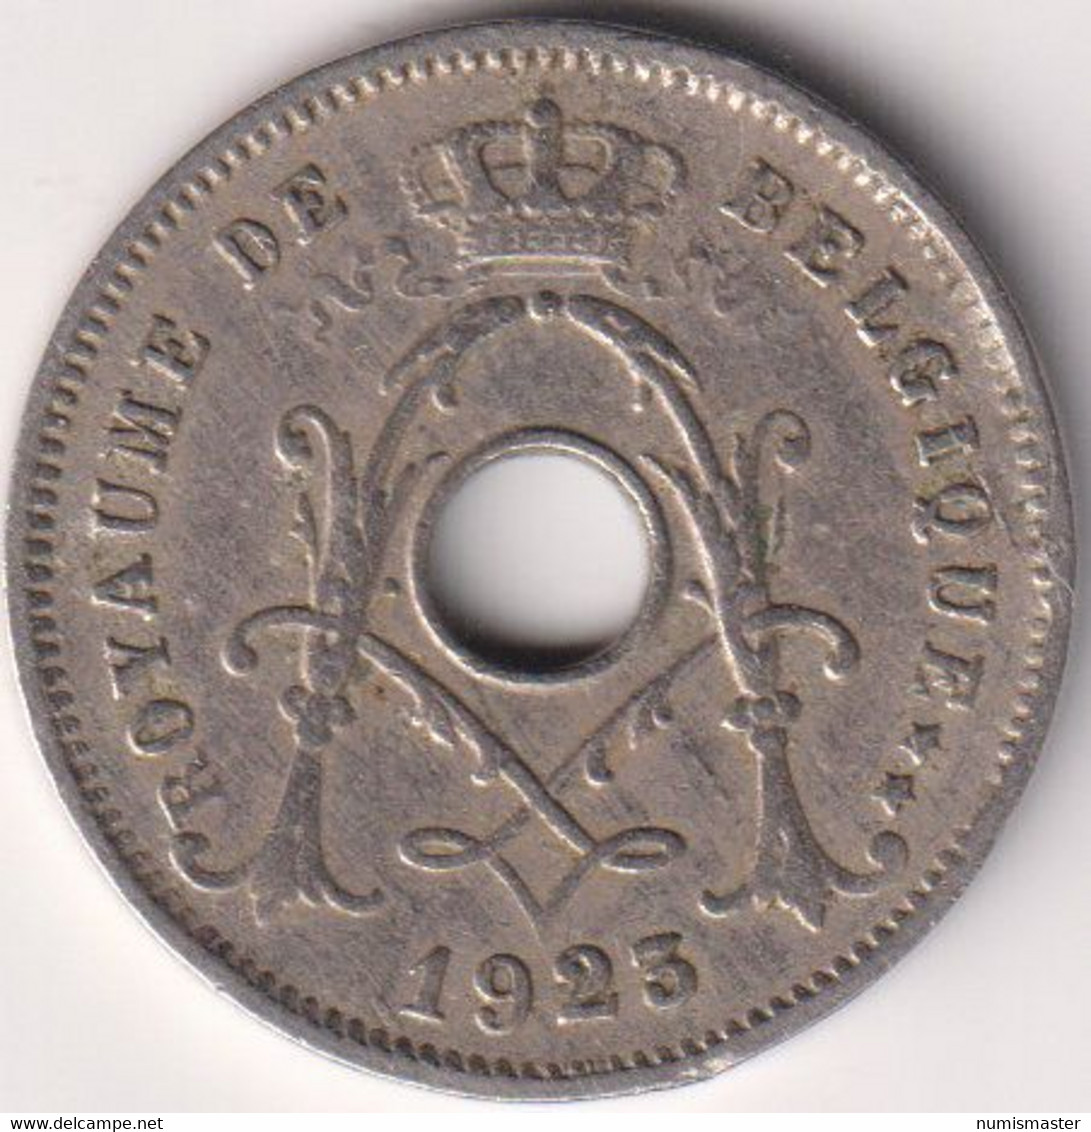 BELGIUM , 5 CENTIMES 1923, FRENCH - 2 Cent